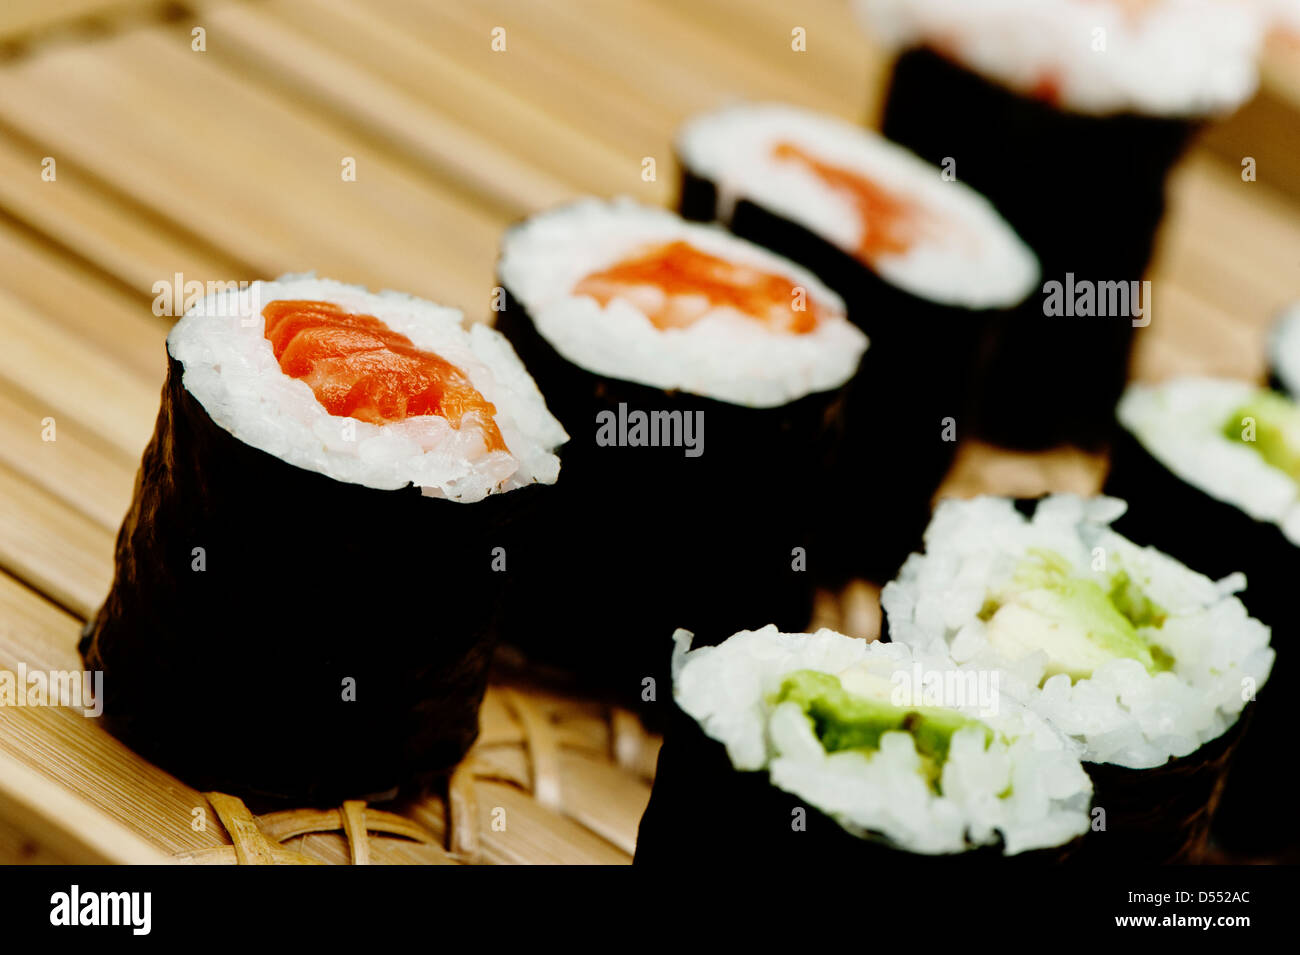 https://c8.alamy.com/comp/D552AC/rolled-sushi-on-a-bamboo-tray-D552AC.jpg